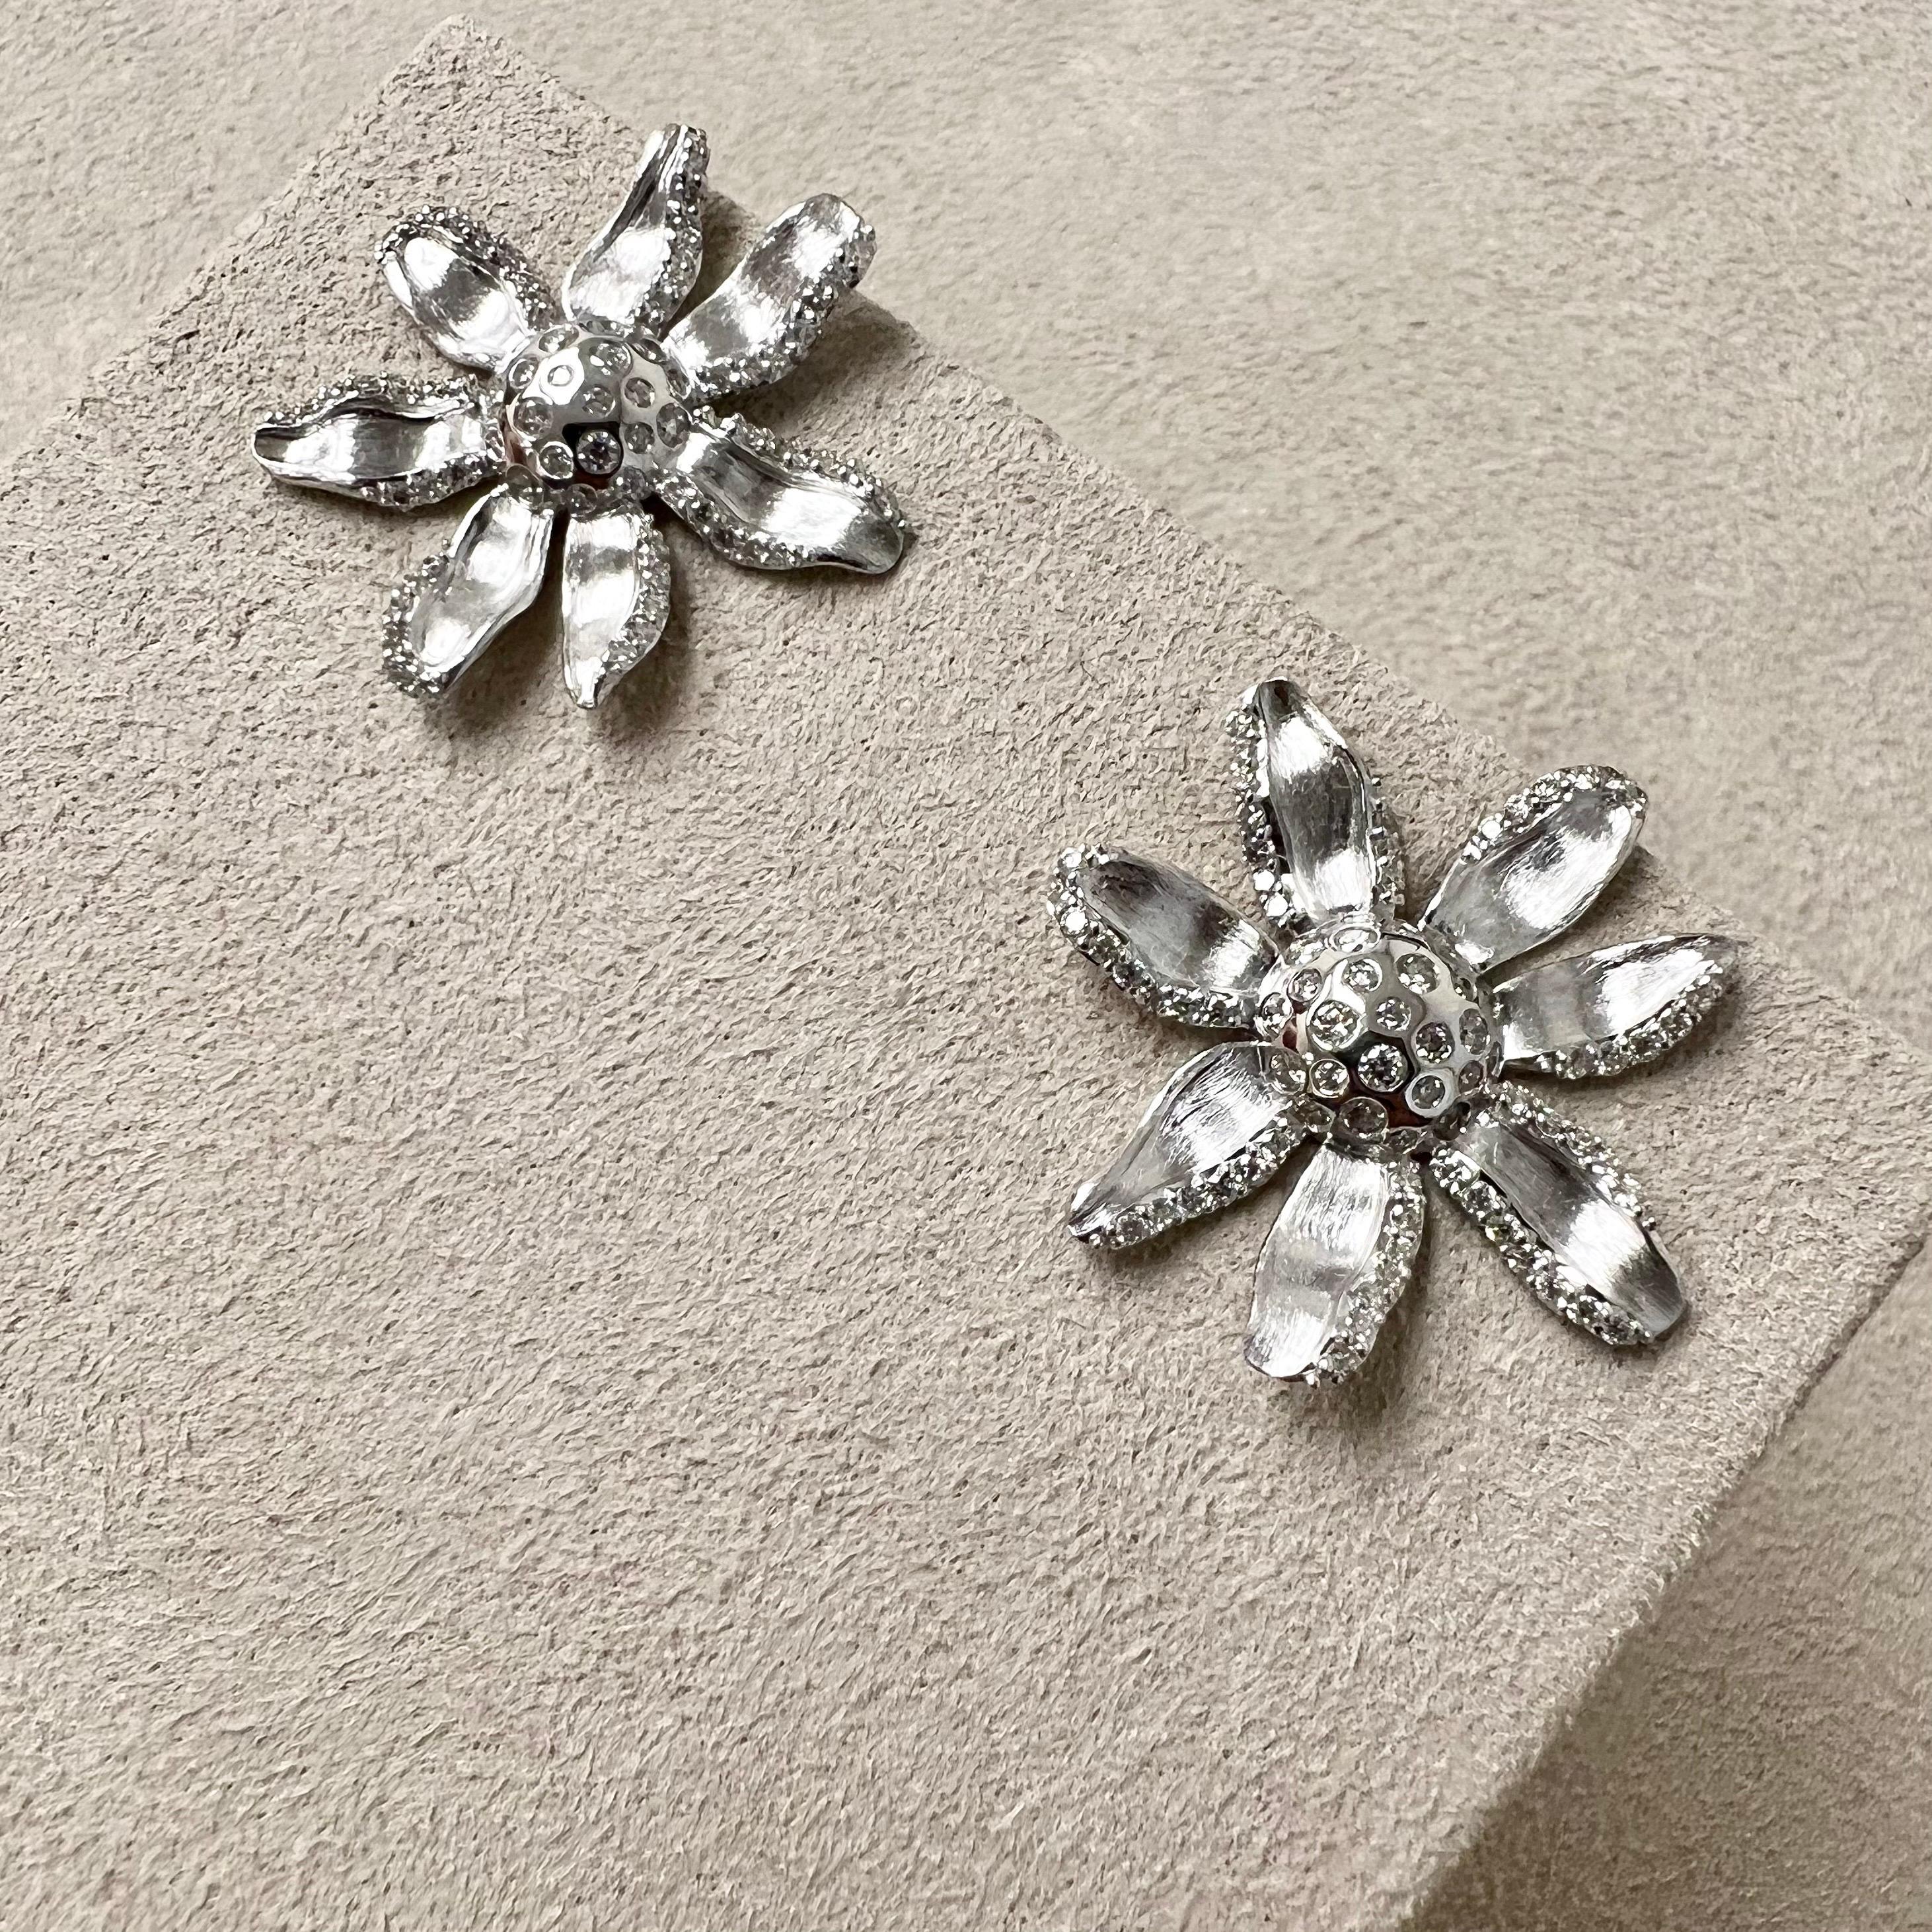 Created in 925 sterling silver
Diamonds 0.80 carat approx.
18kyg butterfly backs
Post backs for pierced ears

Exquisitely crafted in 925 sterling silver, these earrings boast approximately 0.80 carats of dazzling diamonds. For secure, comfortable